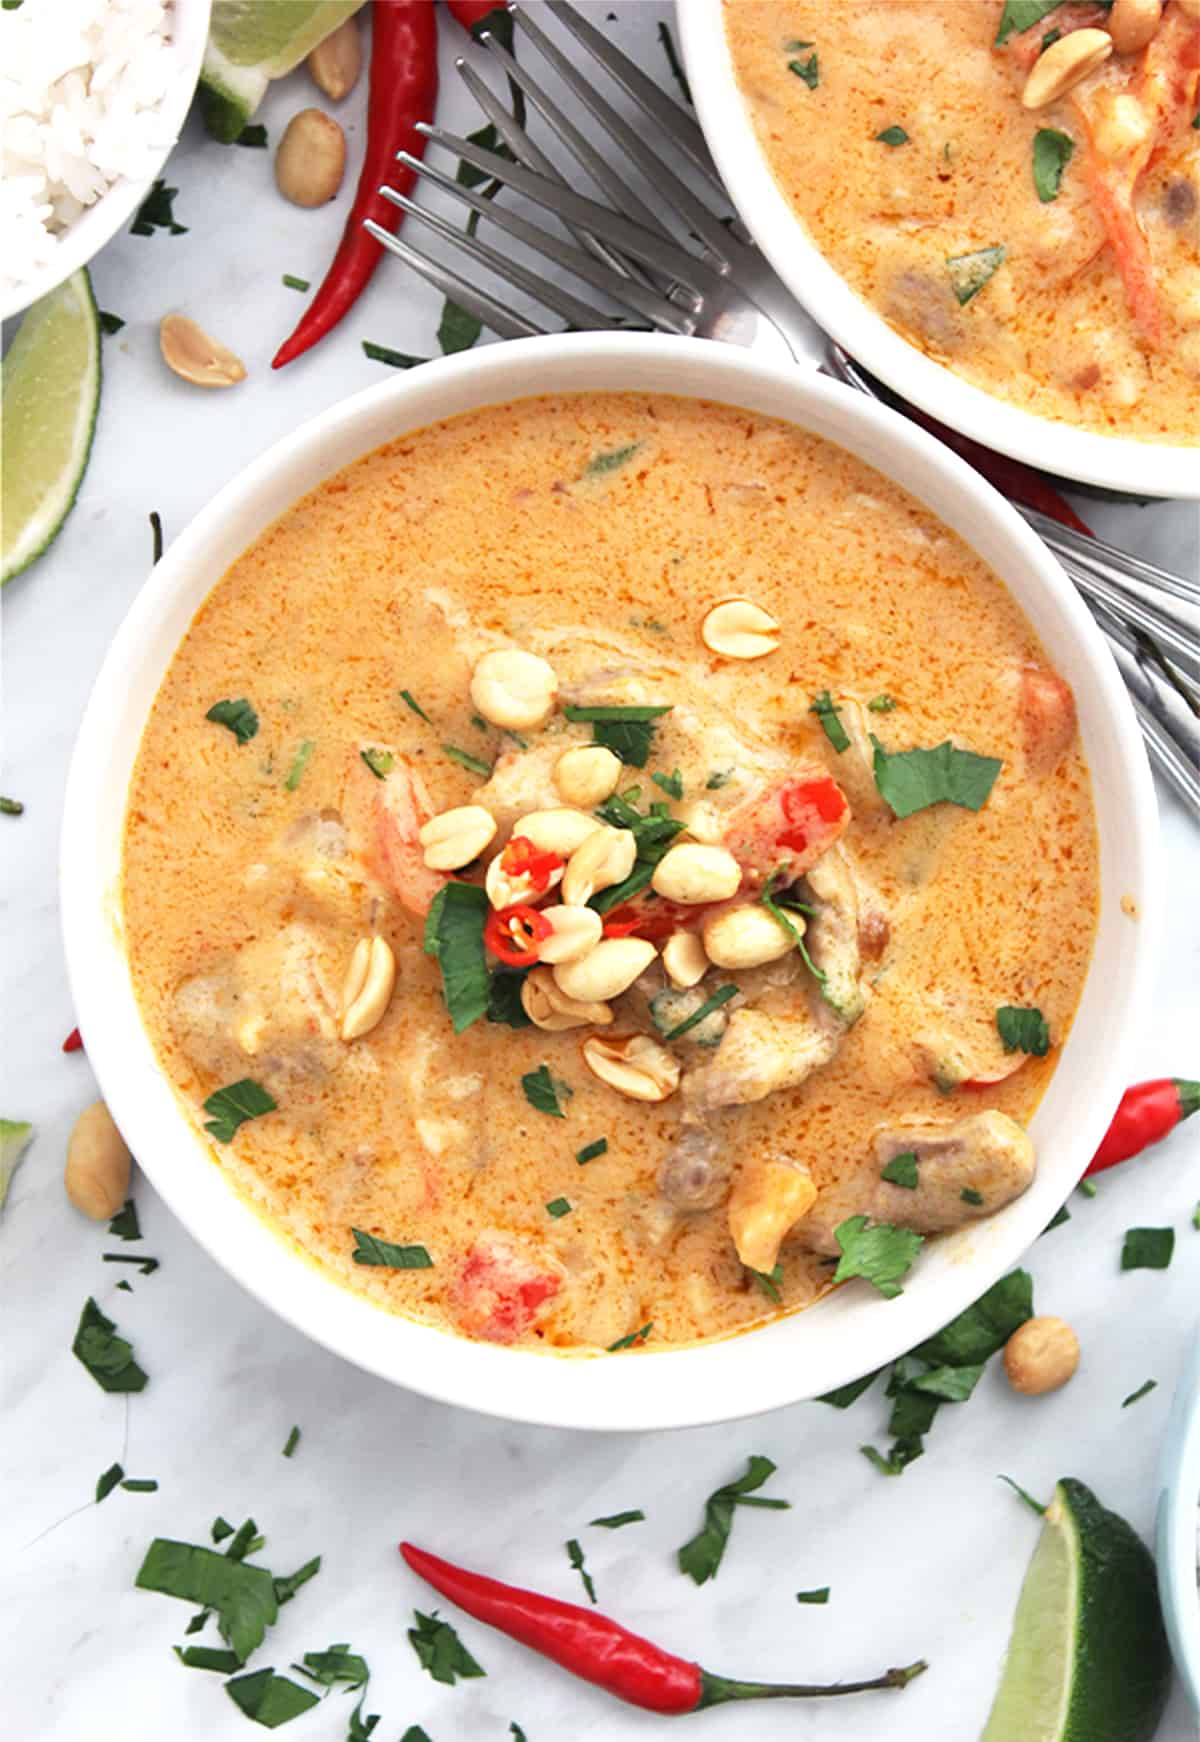 The curry in a white bowl topped with fresh chili, coriander and peanuts.